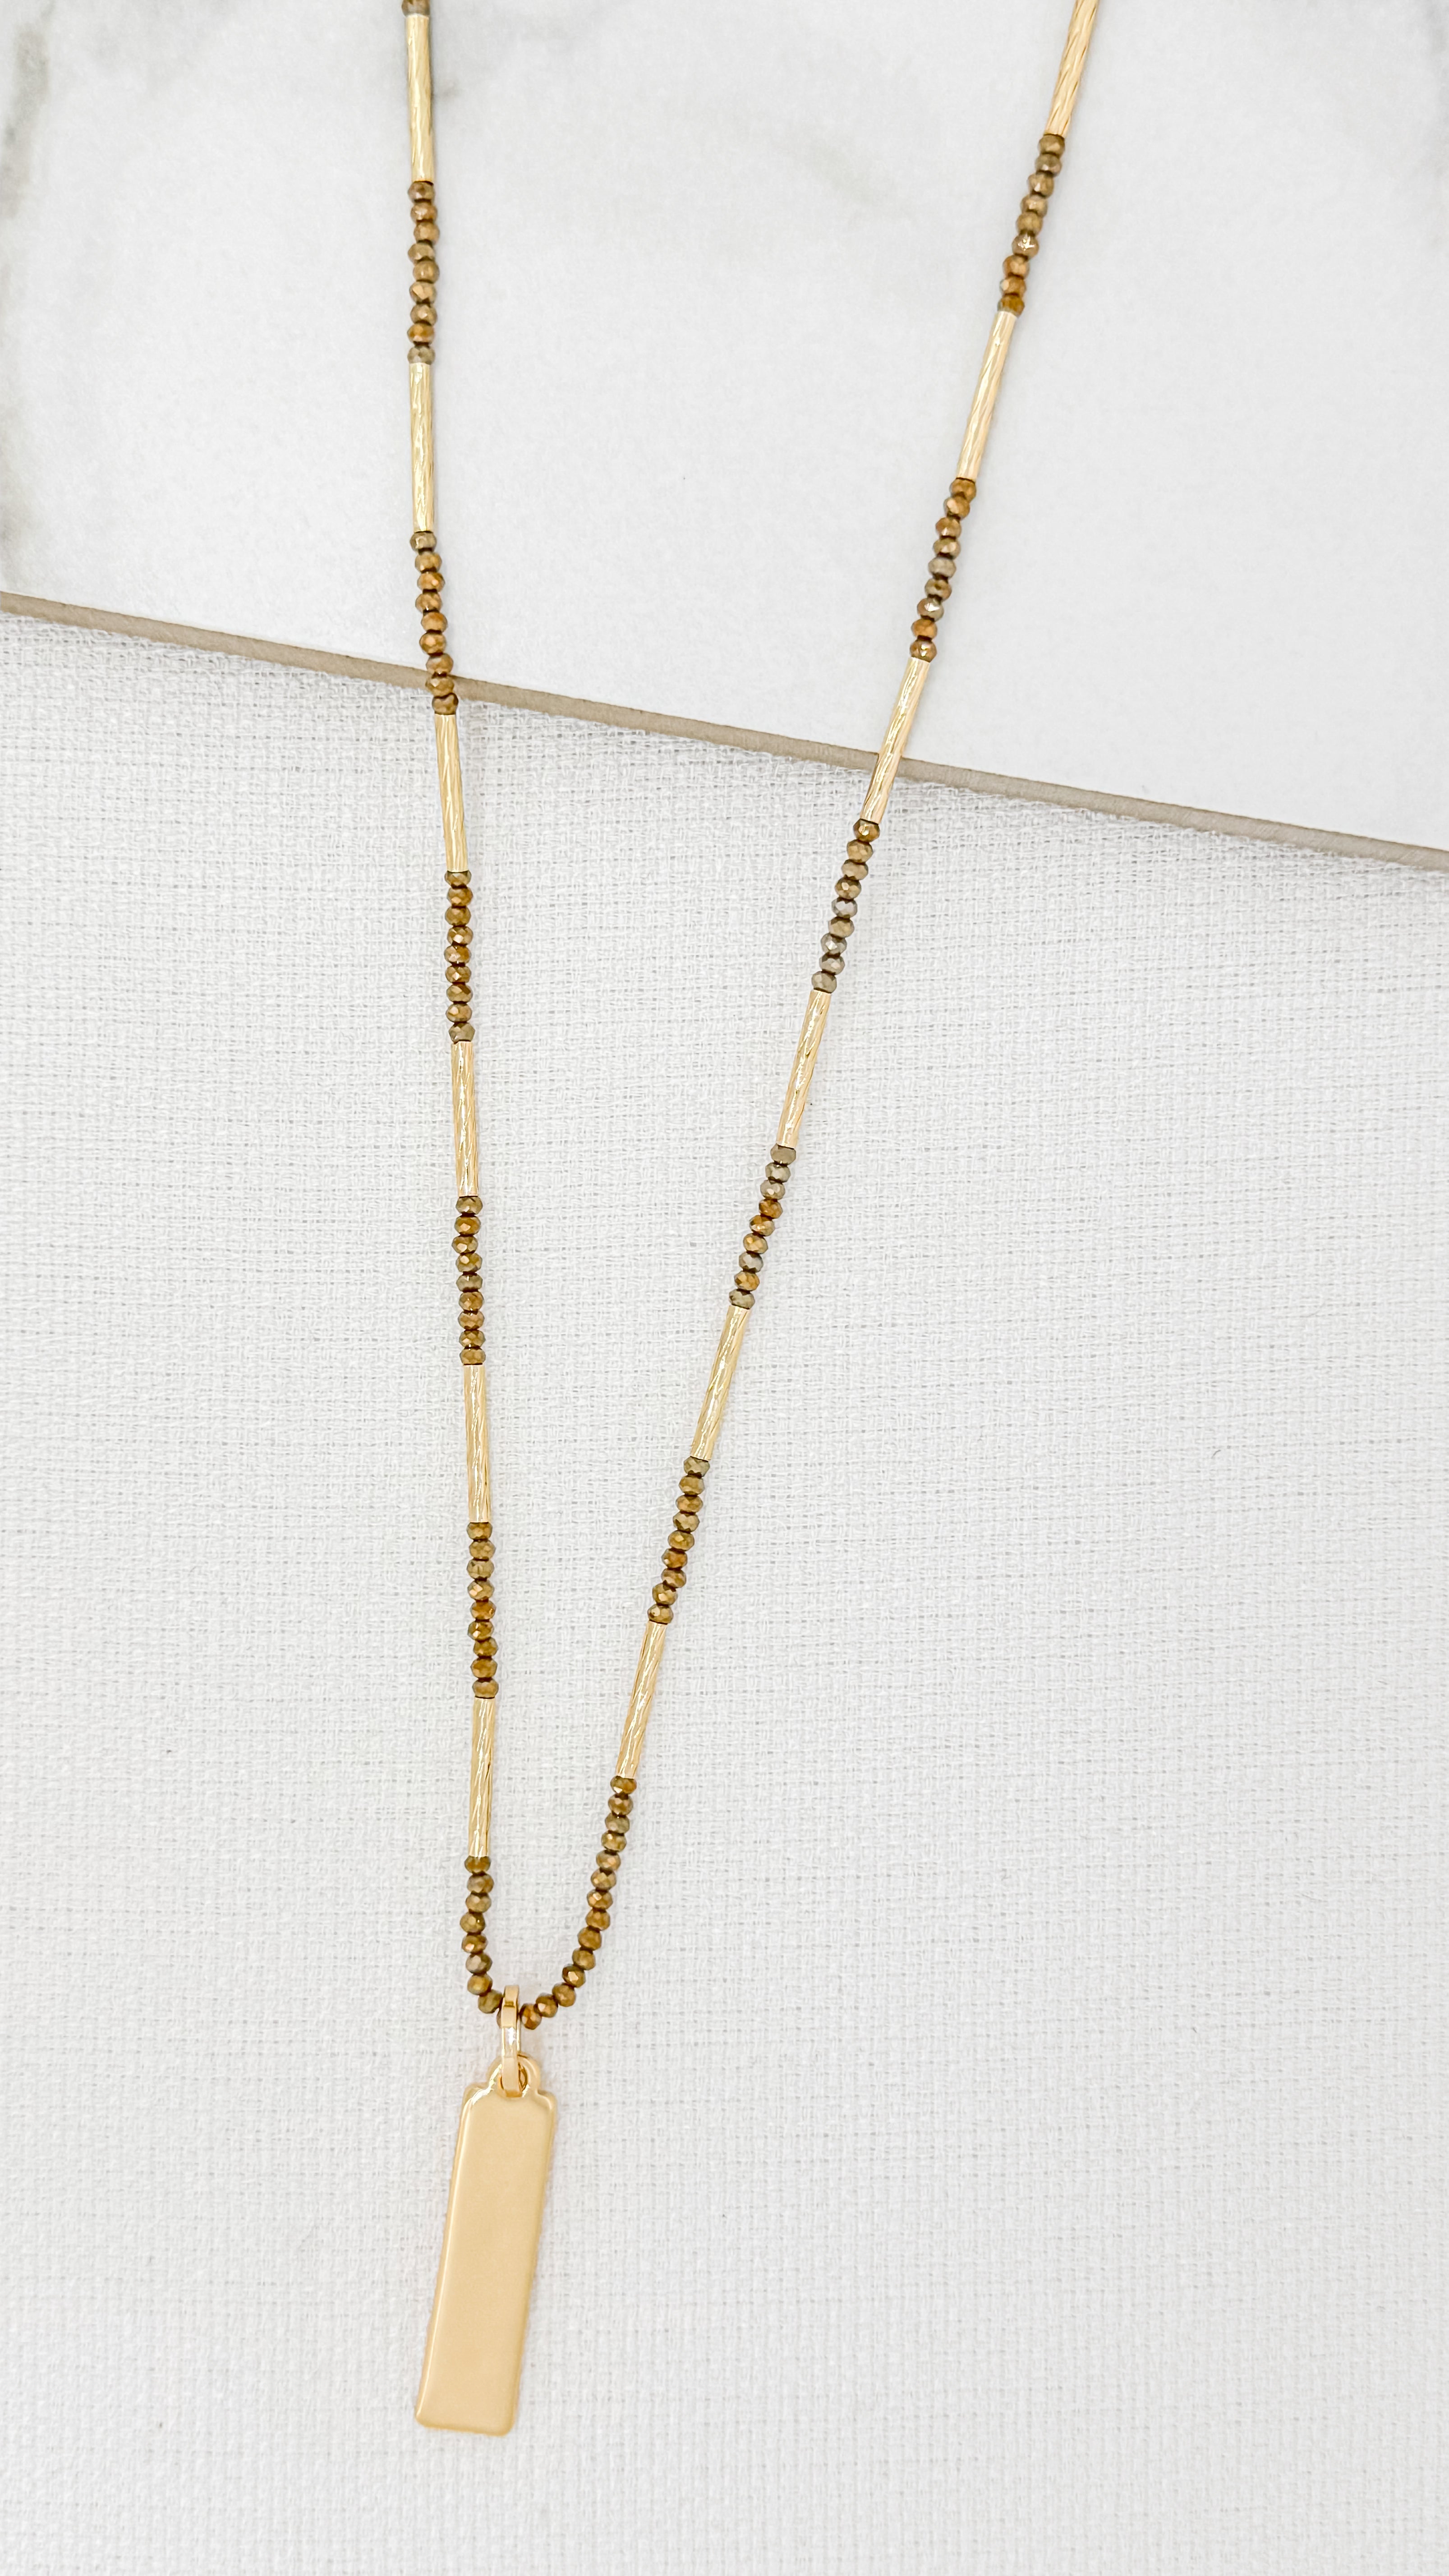 Beaded Long Necklace in Gold